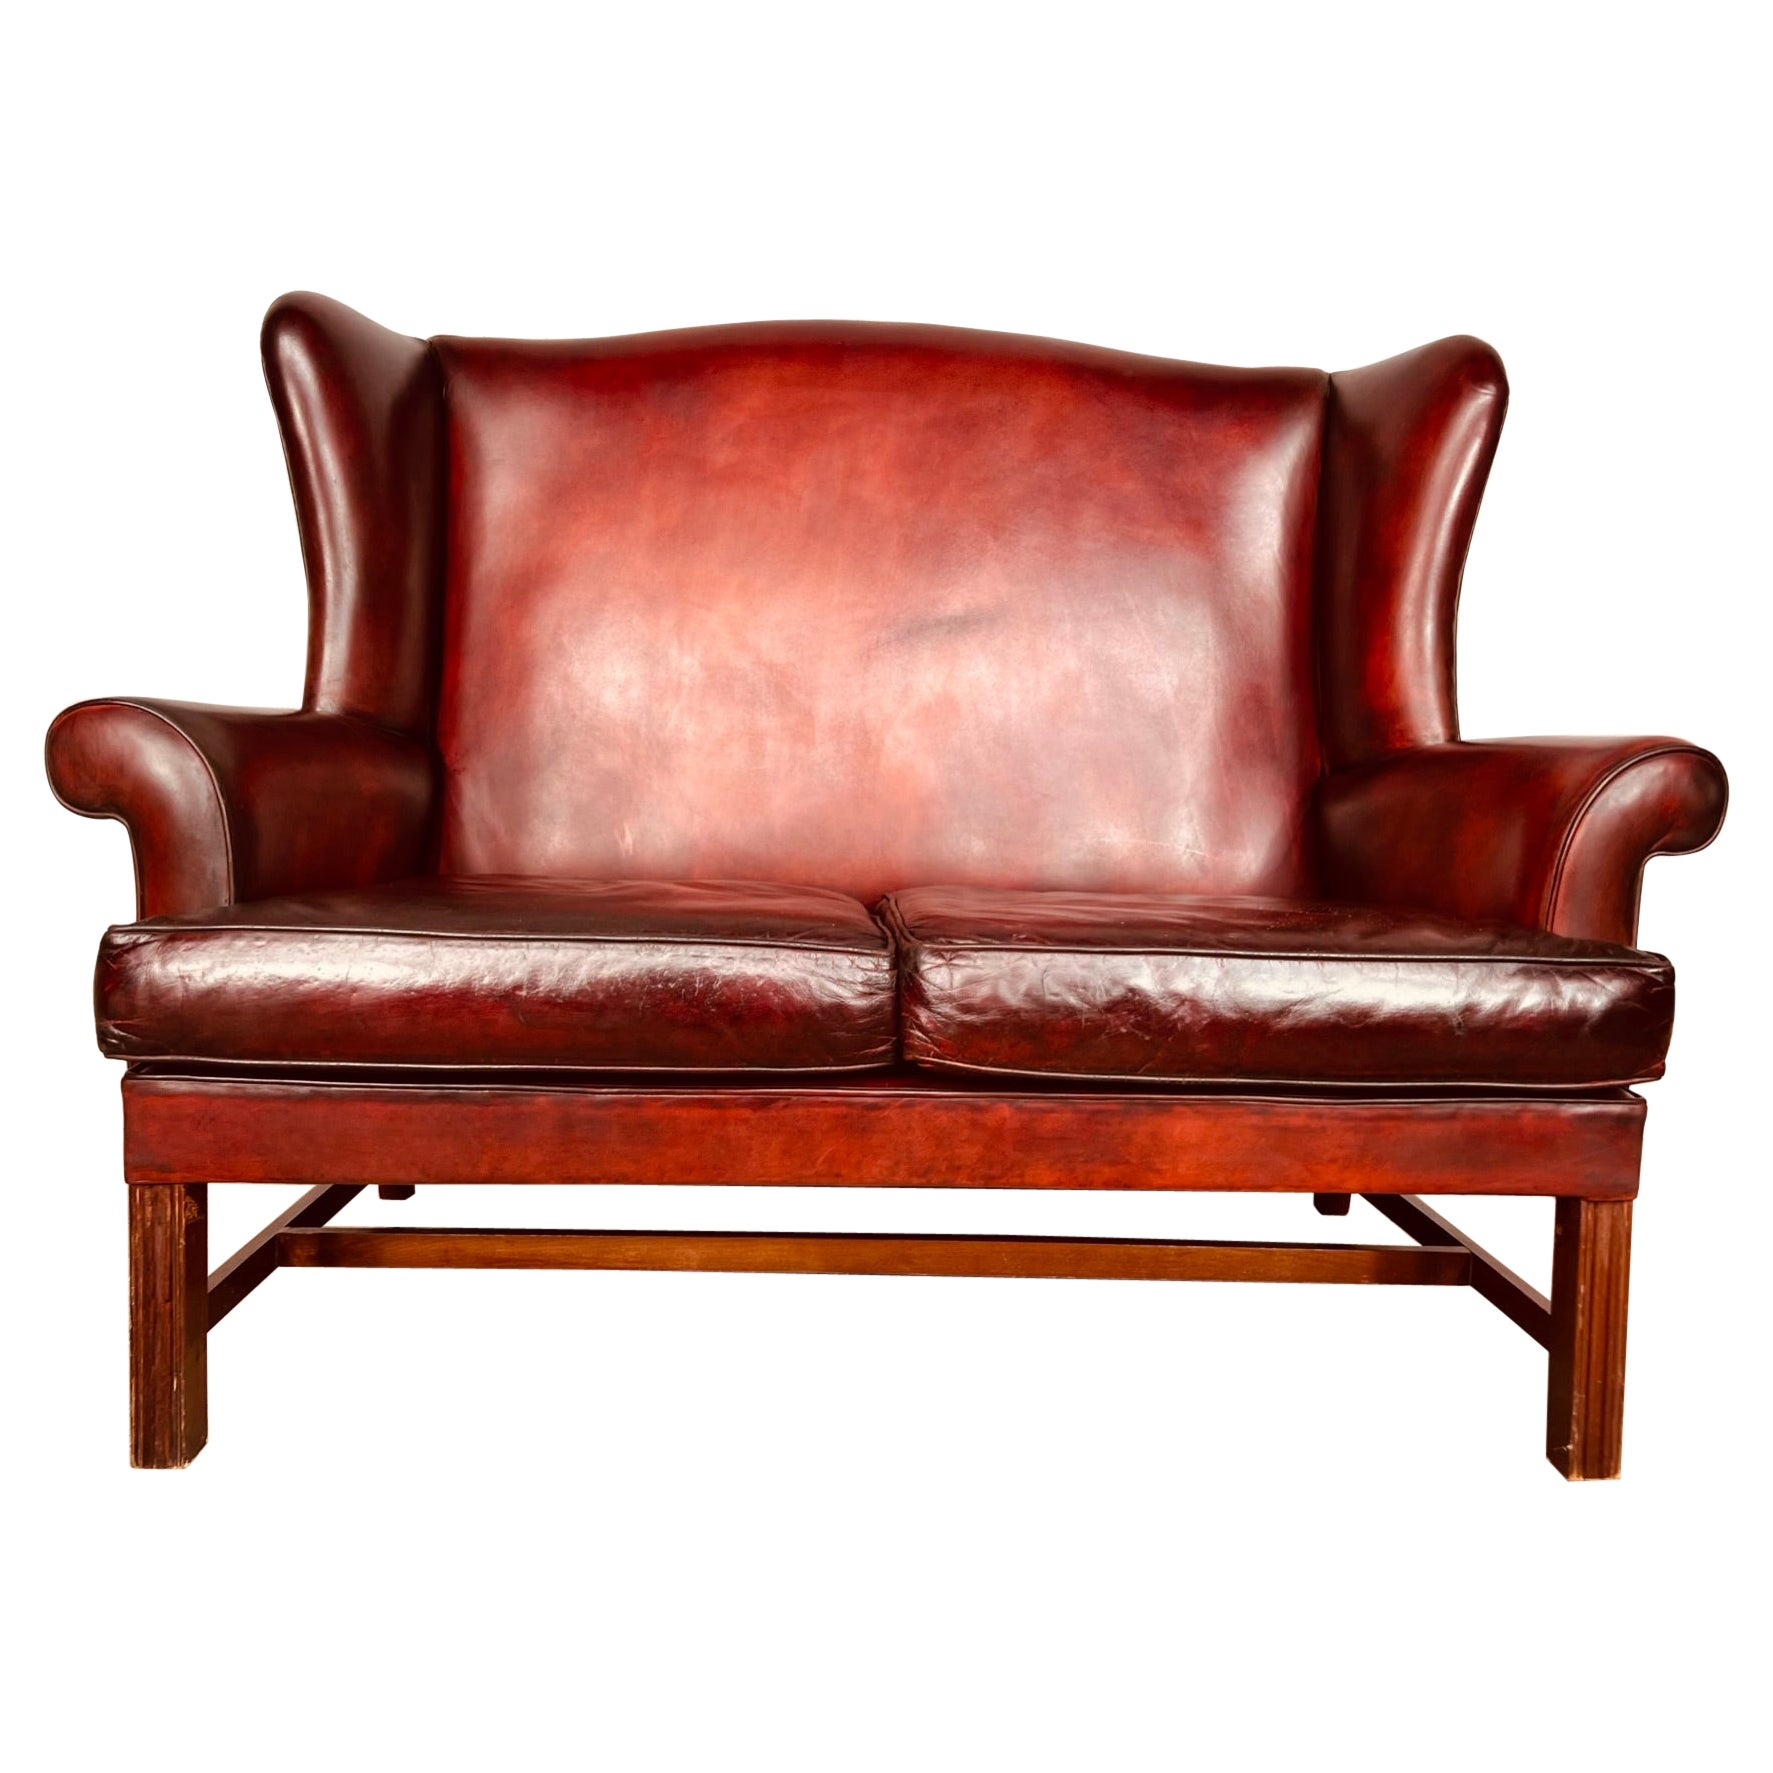 Exceptional English Georgian Country House Leather Wing Back 2 Seater Sofa For Sale